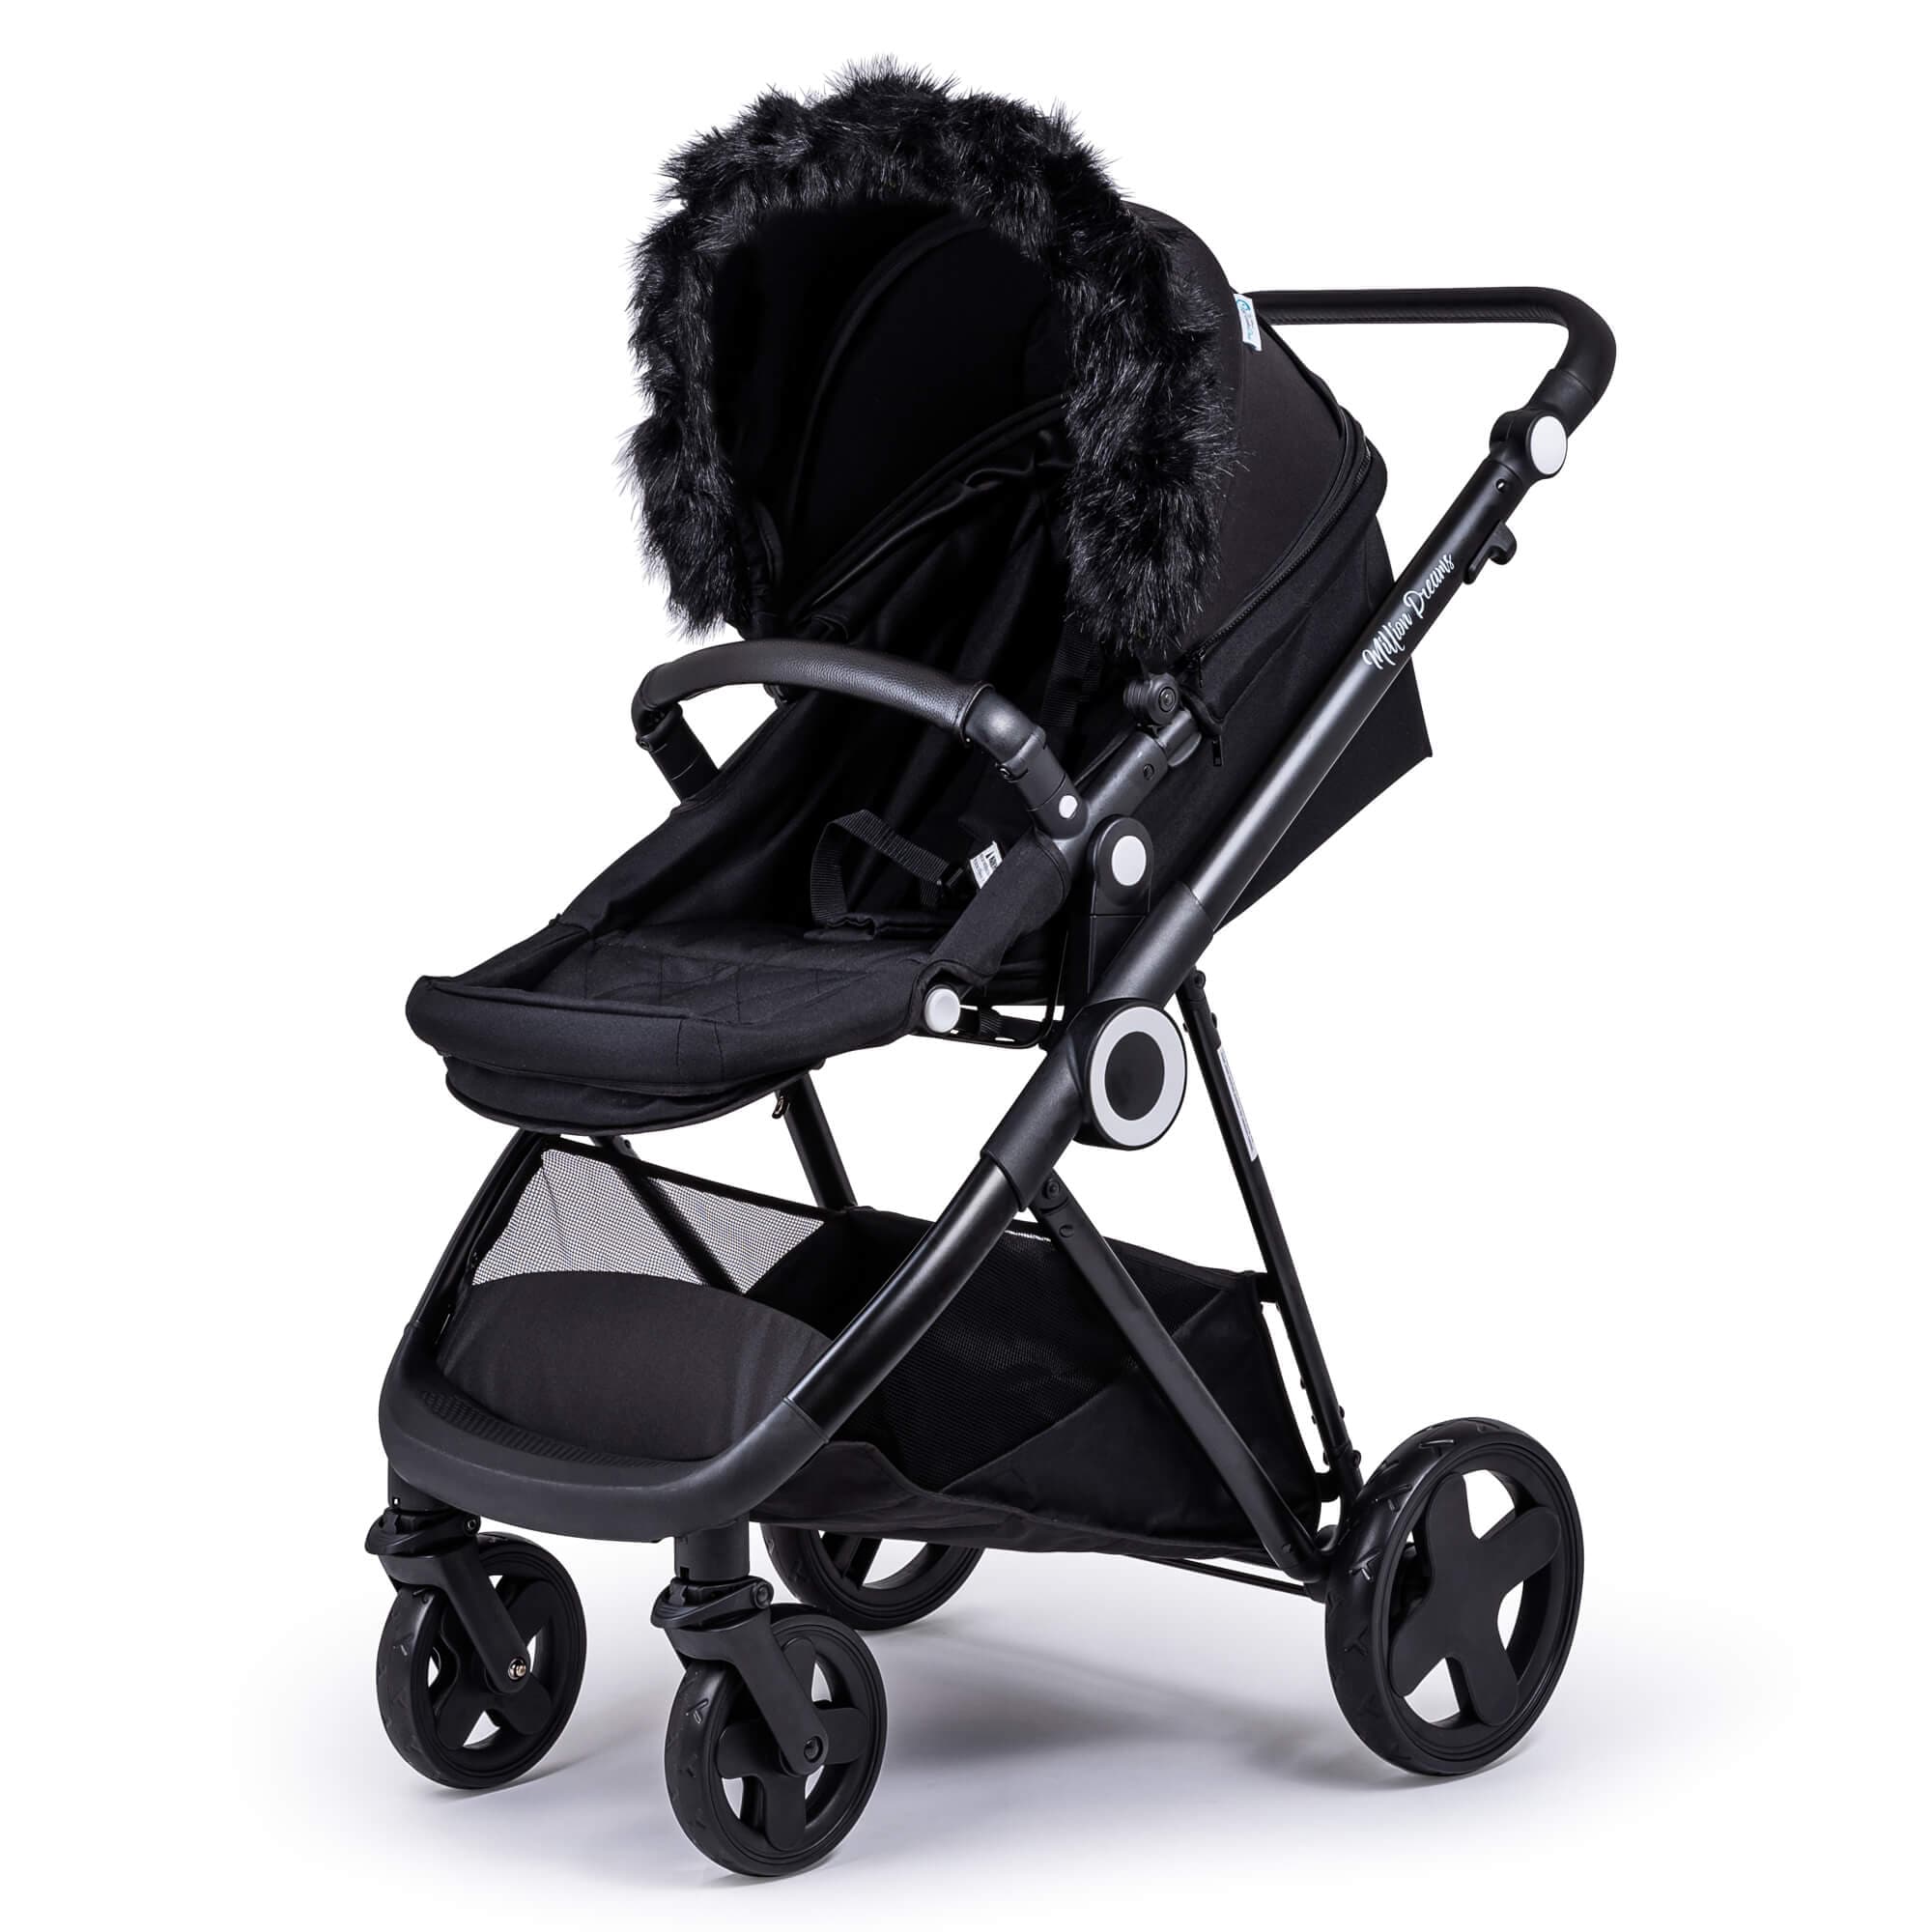 Pram Fur Hood Trim Attachment for Pushchair Compatible with Mothercare - For Your Little One